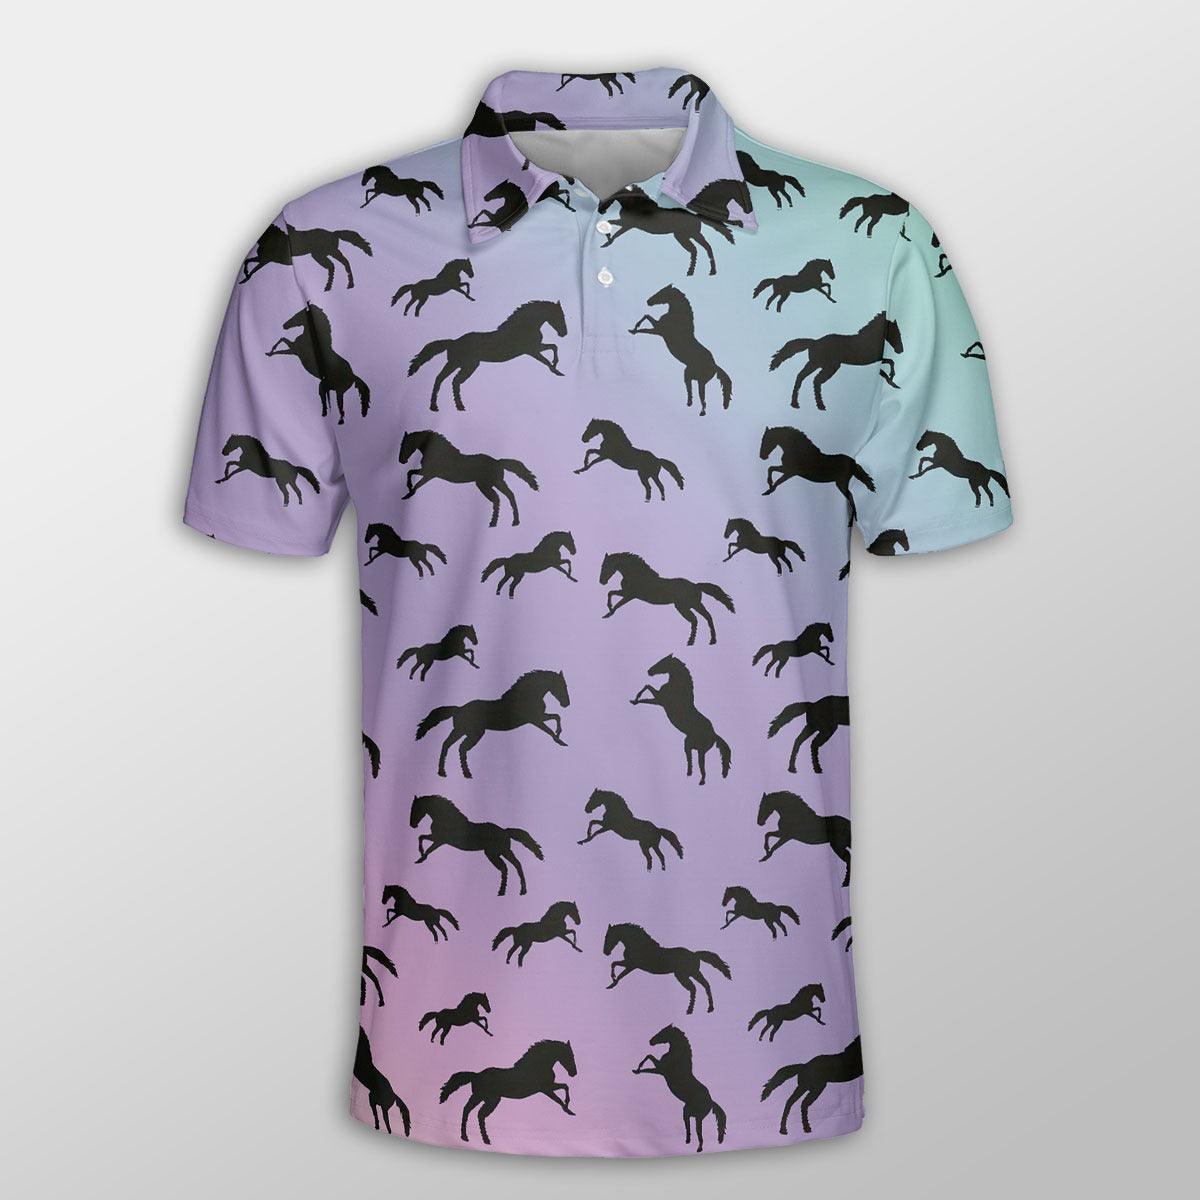 Horse Men Polo Shirts For Summer -Horse Ombre Pattern Button Shirts For Men - Perfect Gift For Horse Lovers, Cattle Lovers - Amzanimalsgift